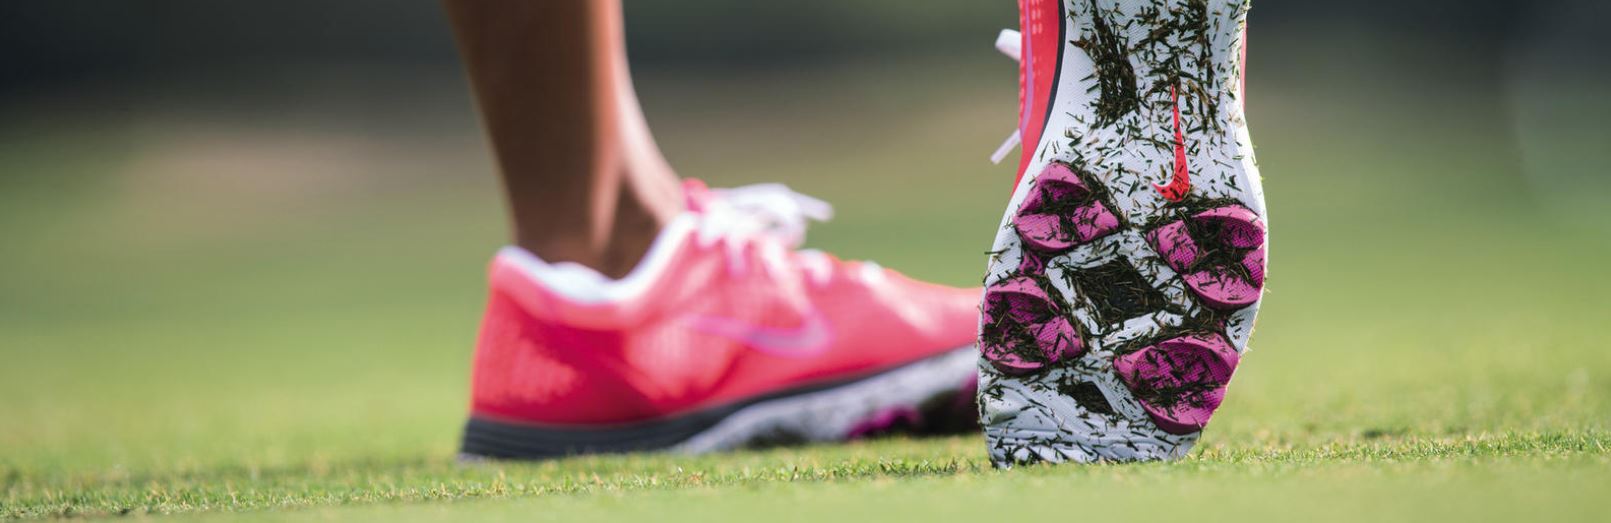 golf shoes with ankle support